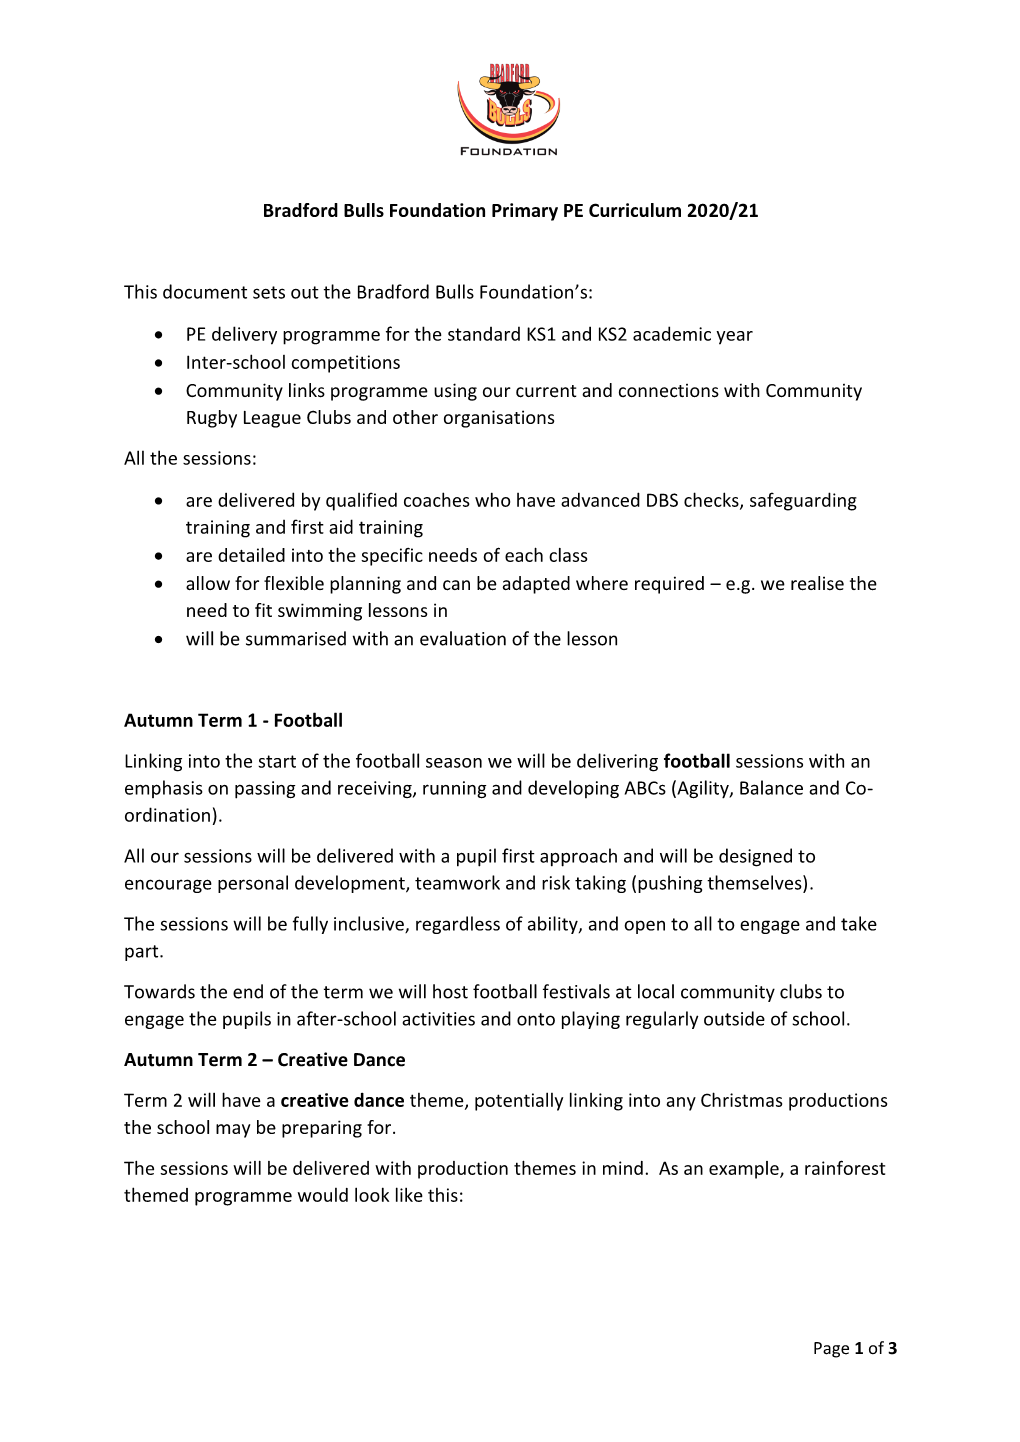 Bradford Bulls Foundation Primary PE Curriculum 2020/21 This Document Sets out the Bradford Bulls Foundation's: • PE Deliver